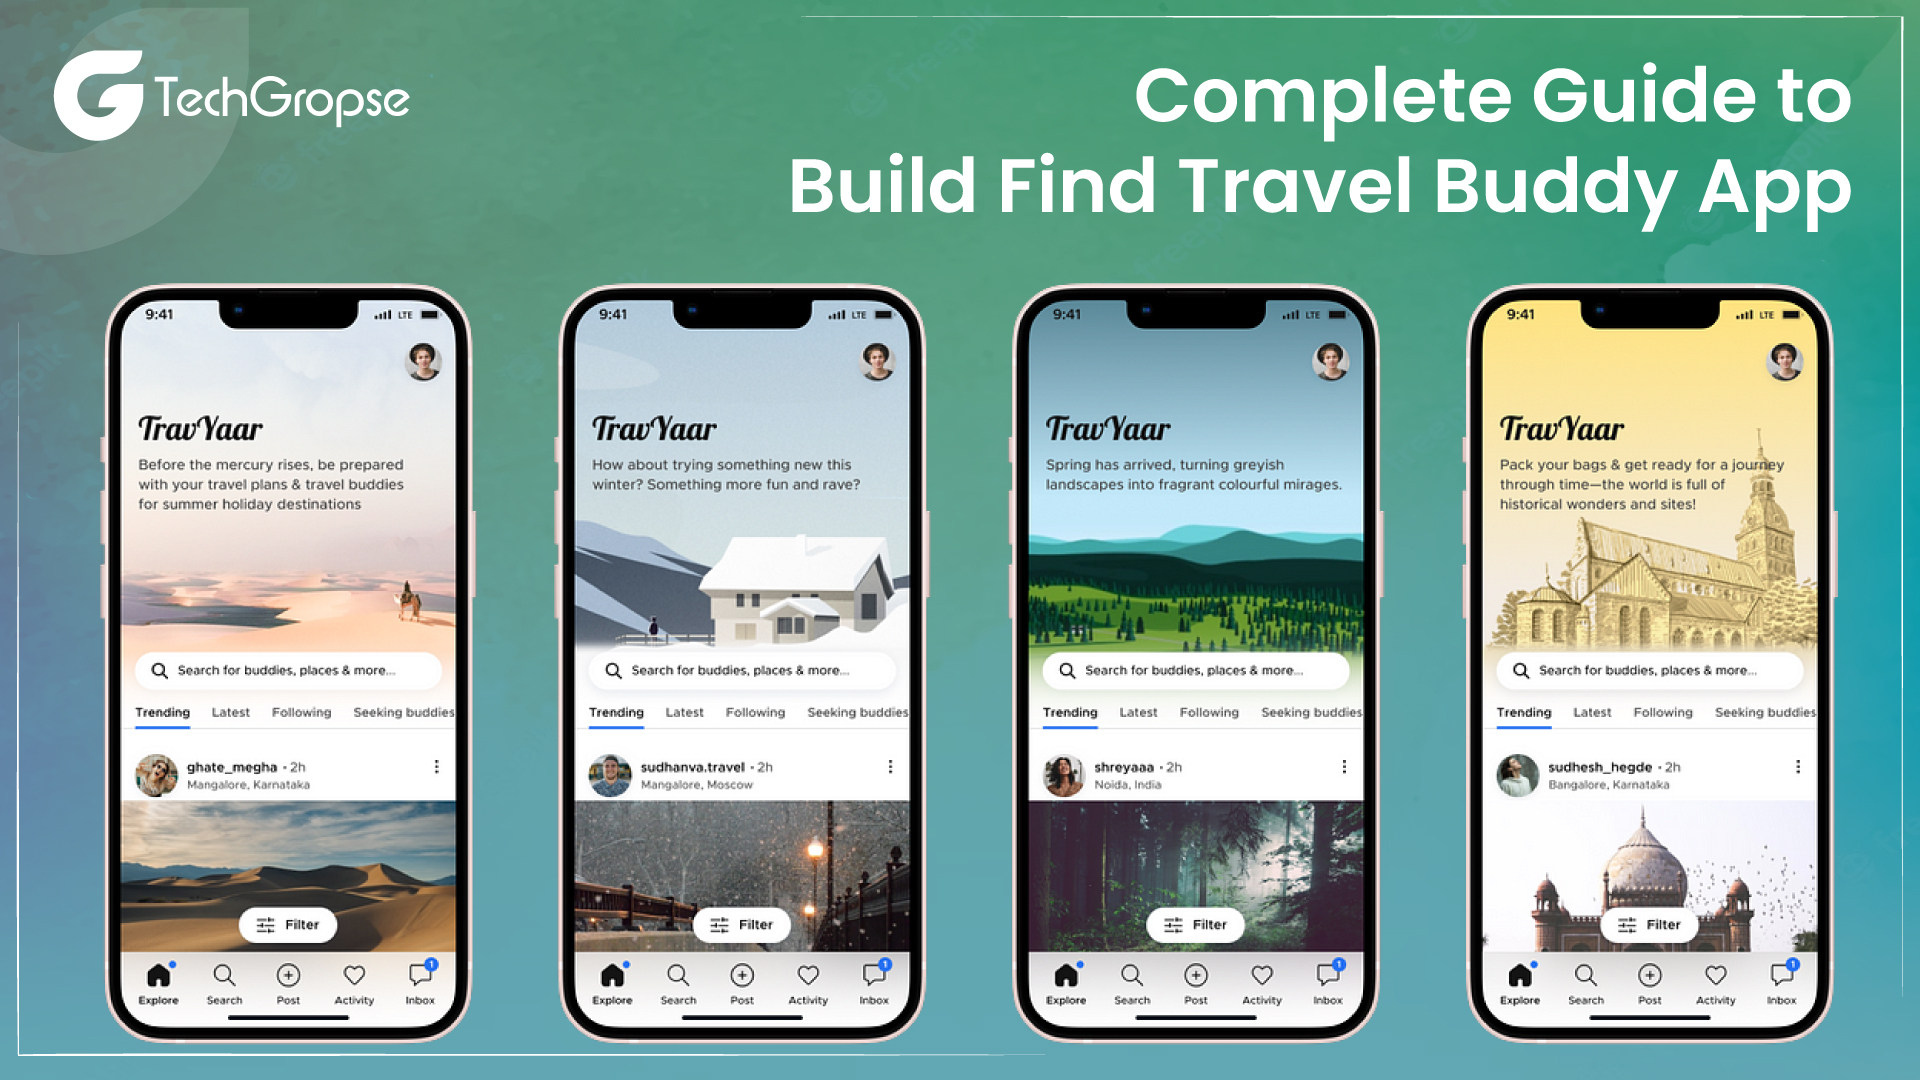 Complete Guide to Build Find Travel Buddy App